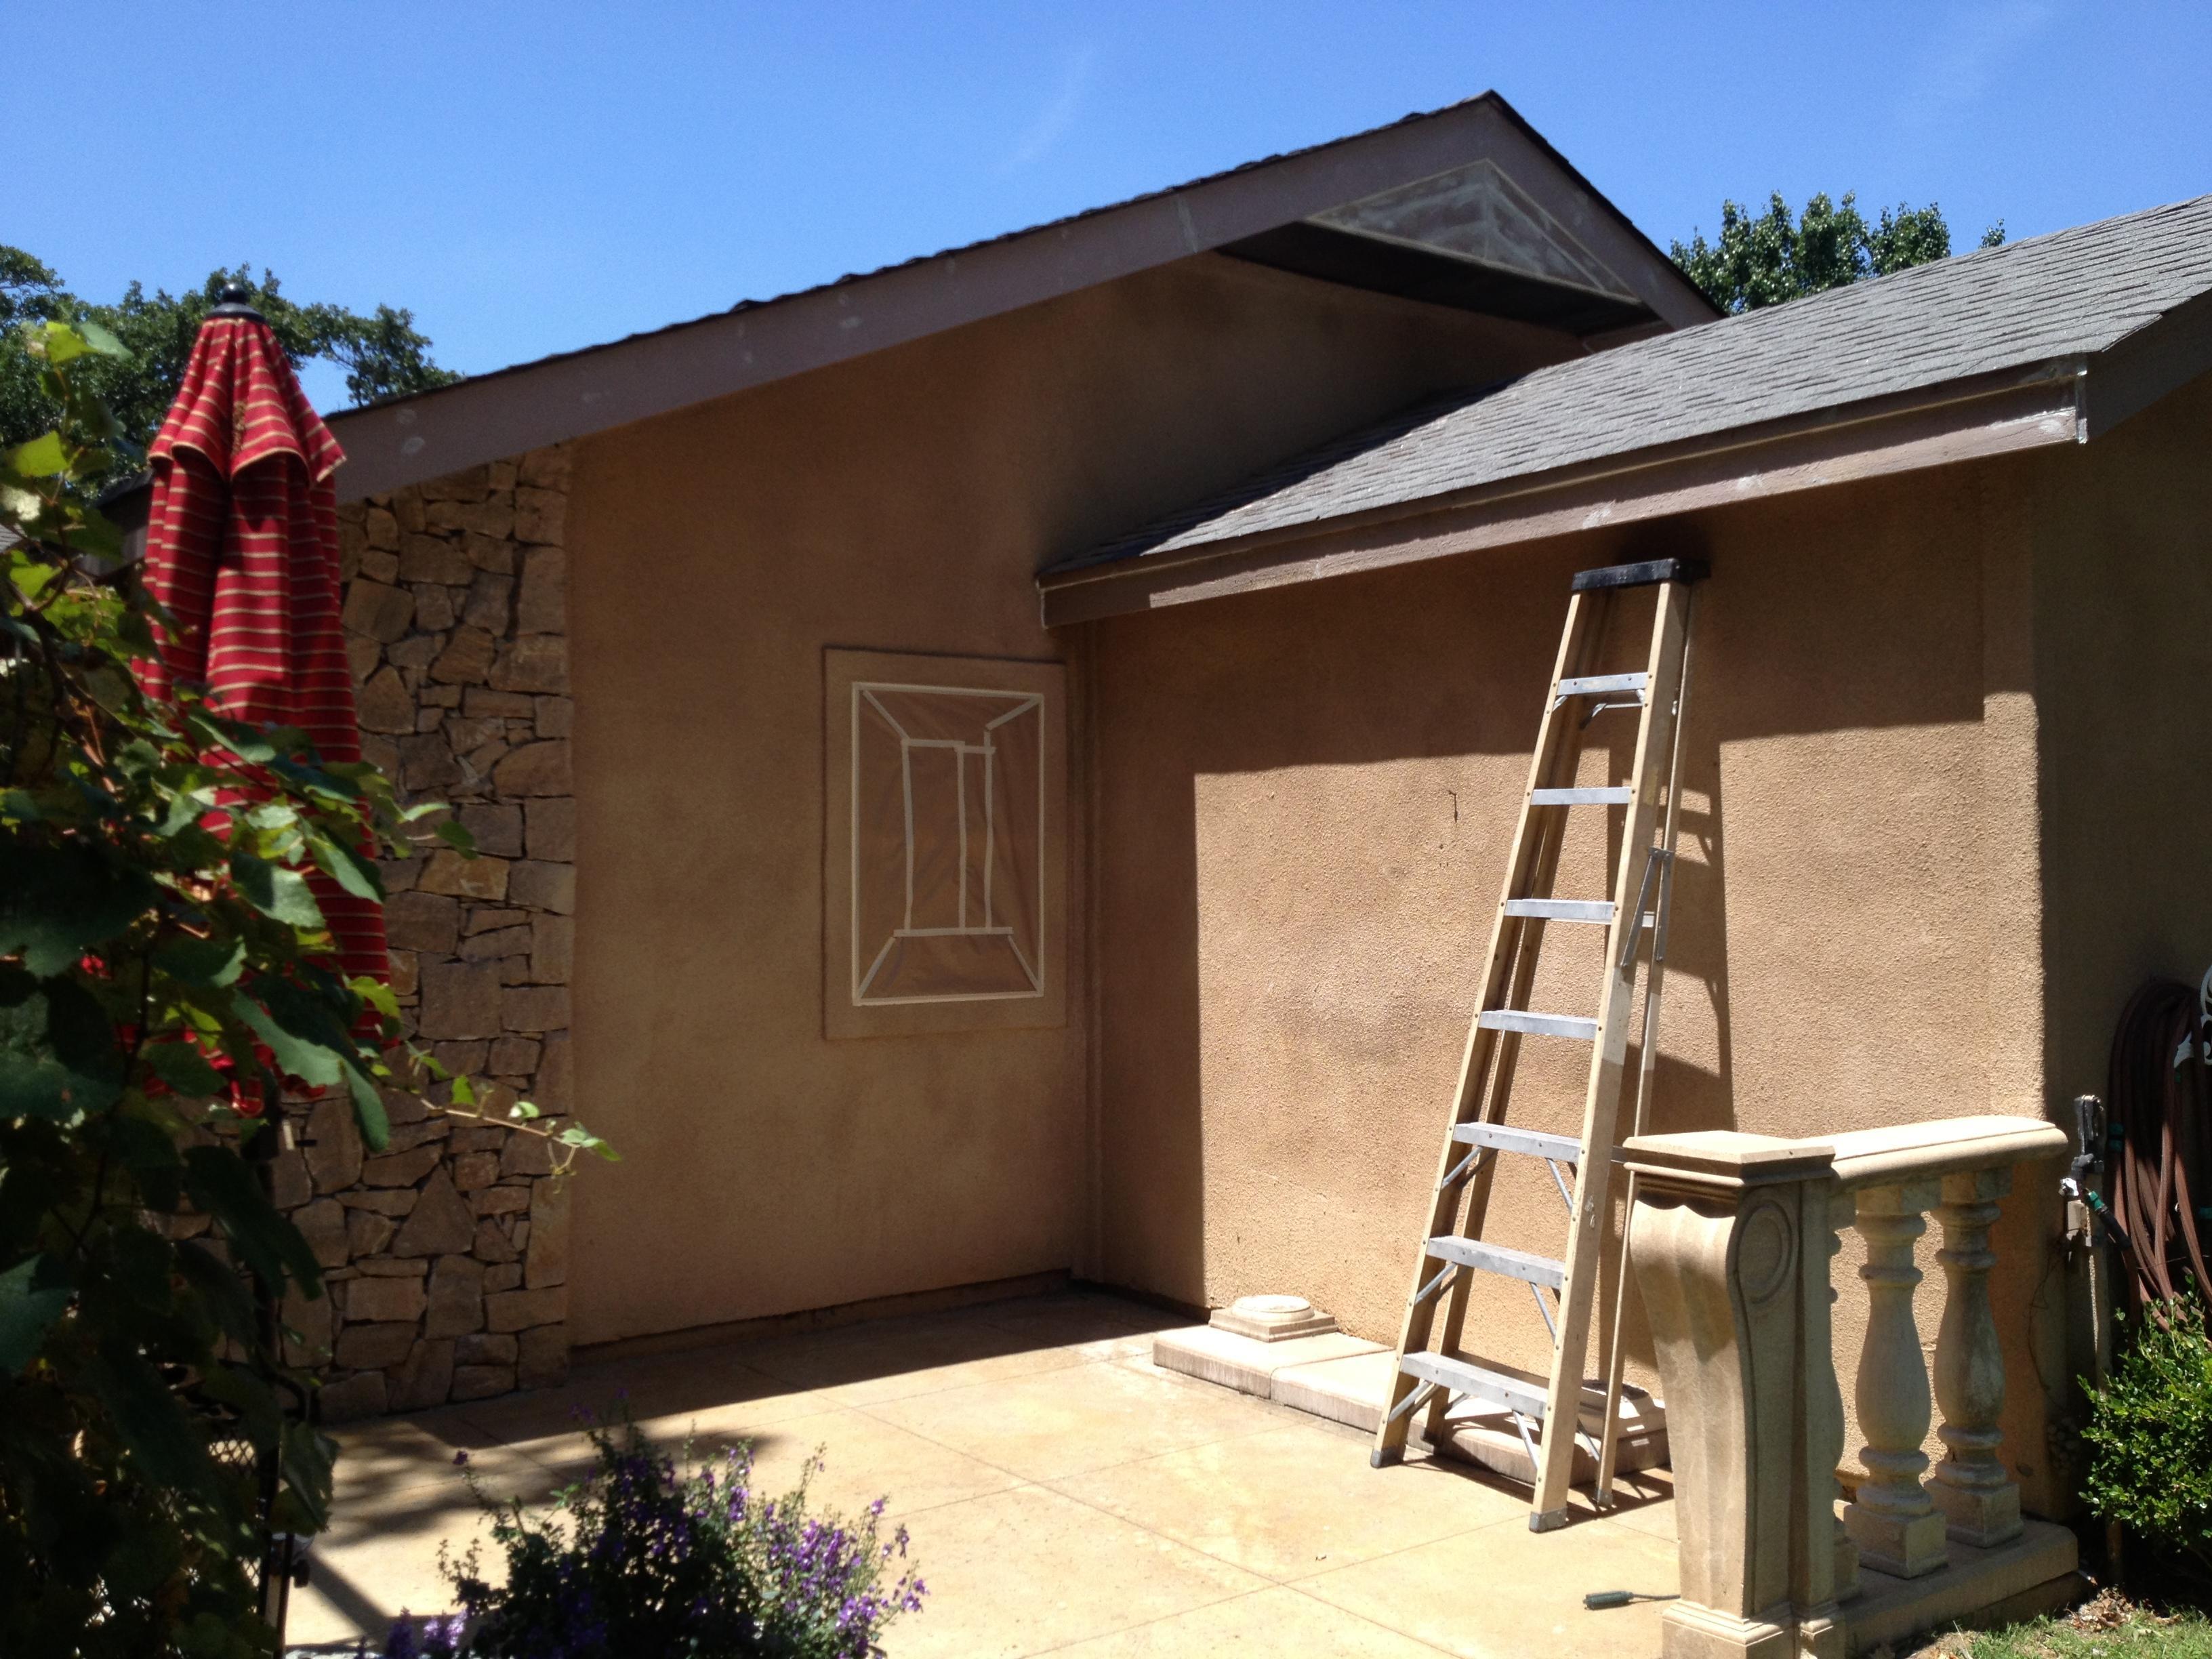 Complete color change on the exterior stucco, soffits, facia, siding, doors, and trim!